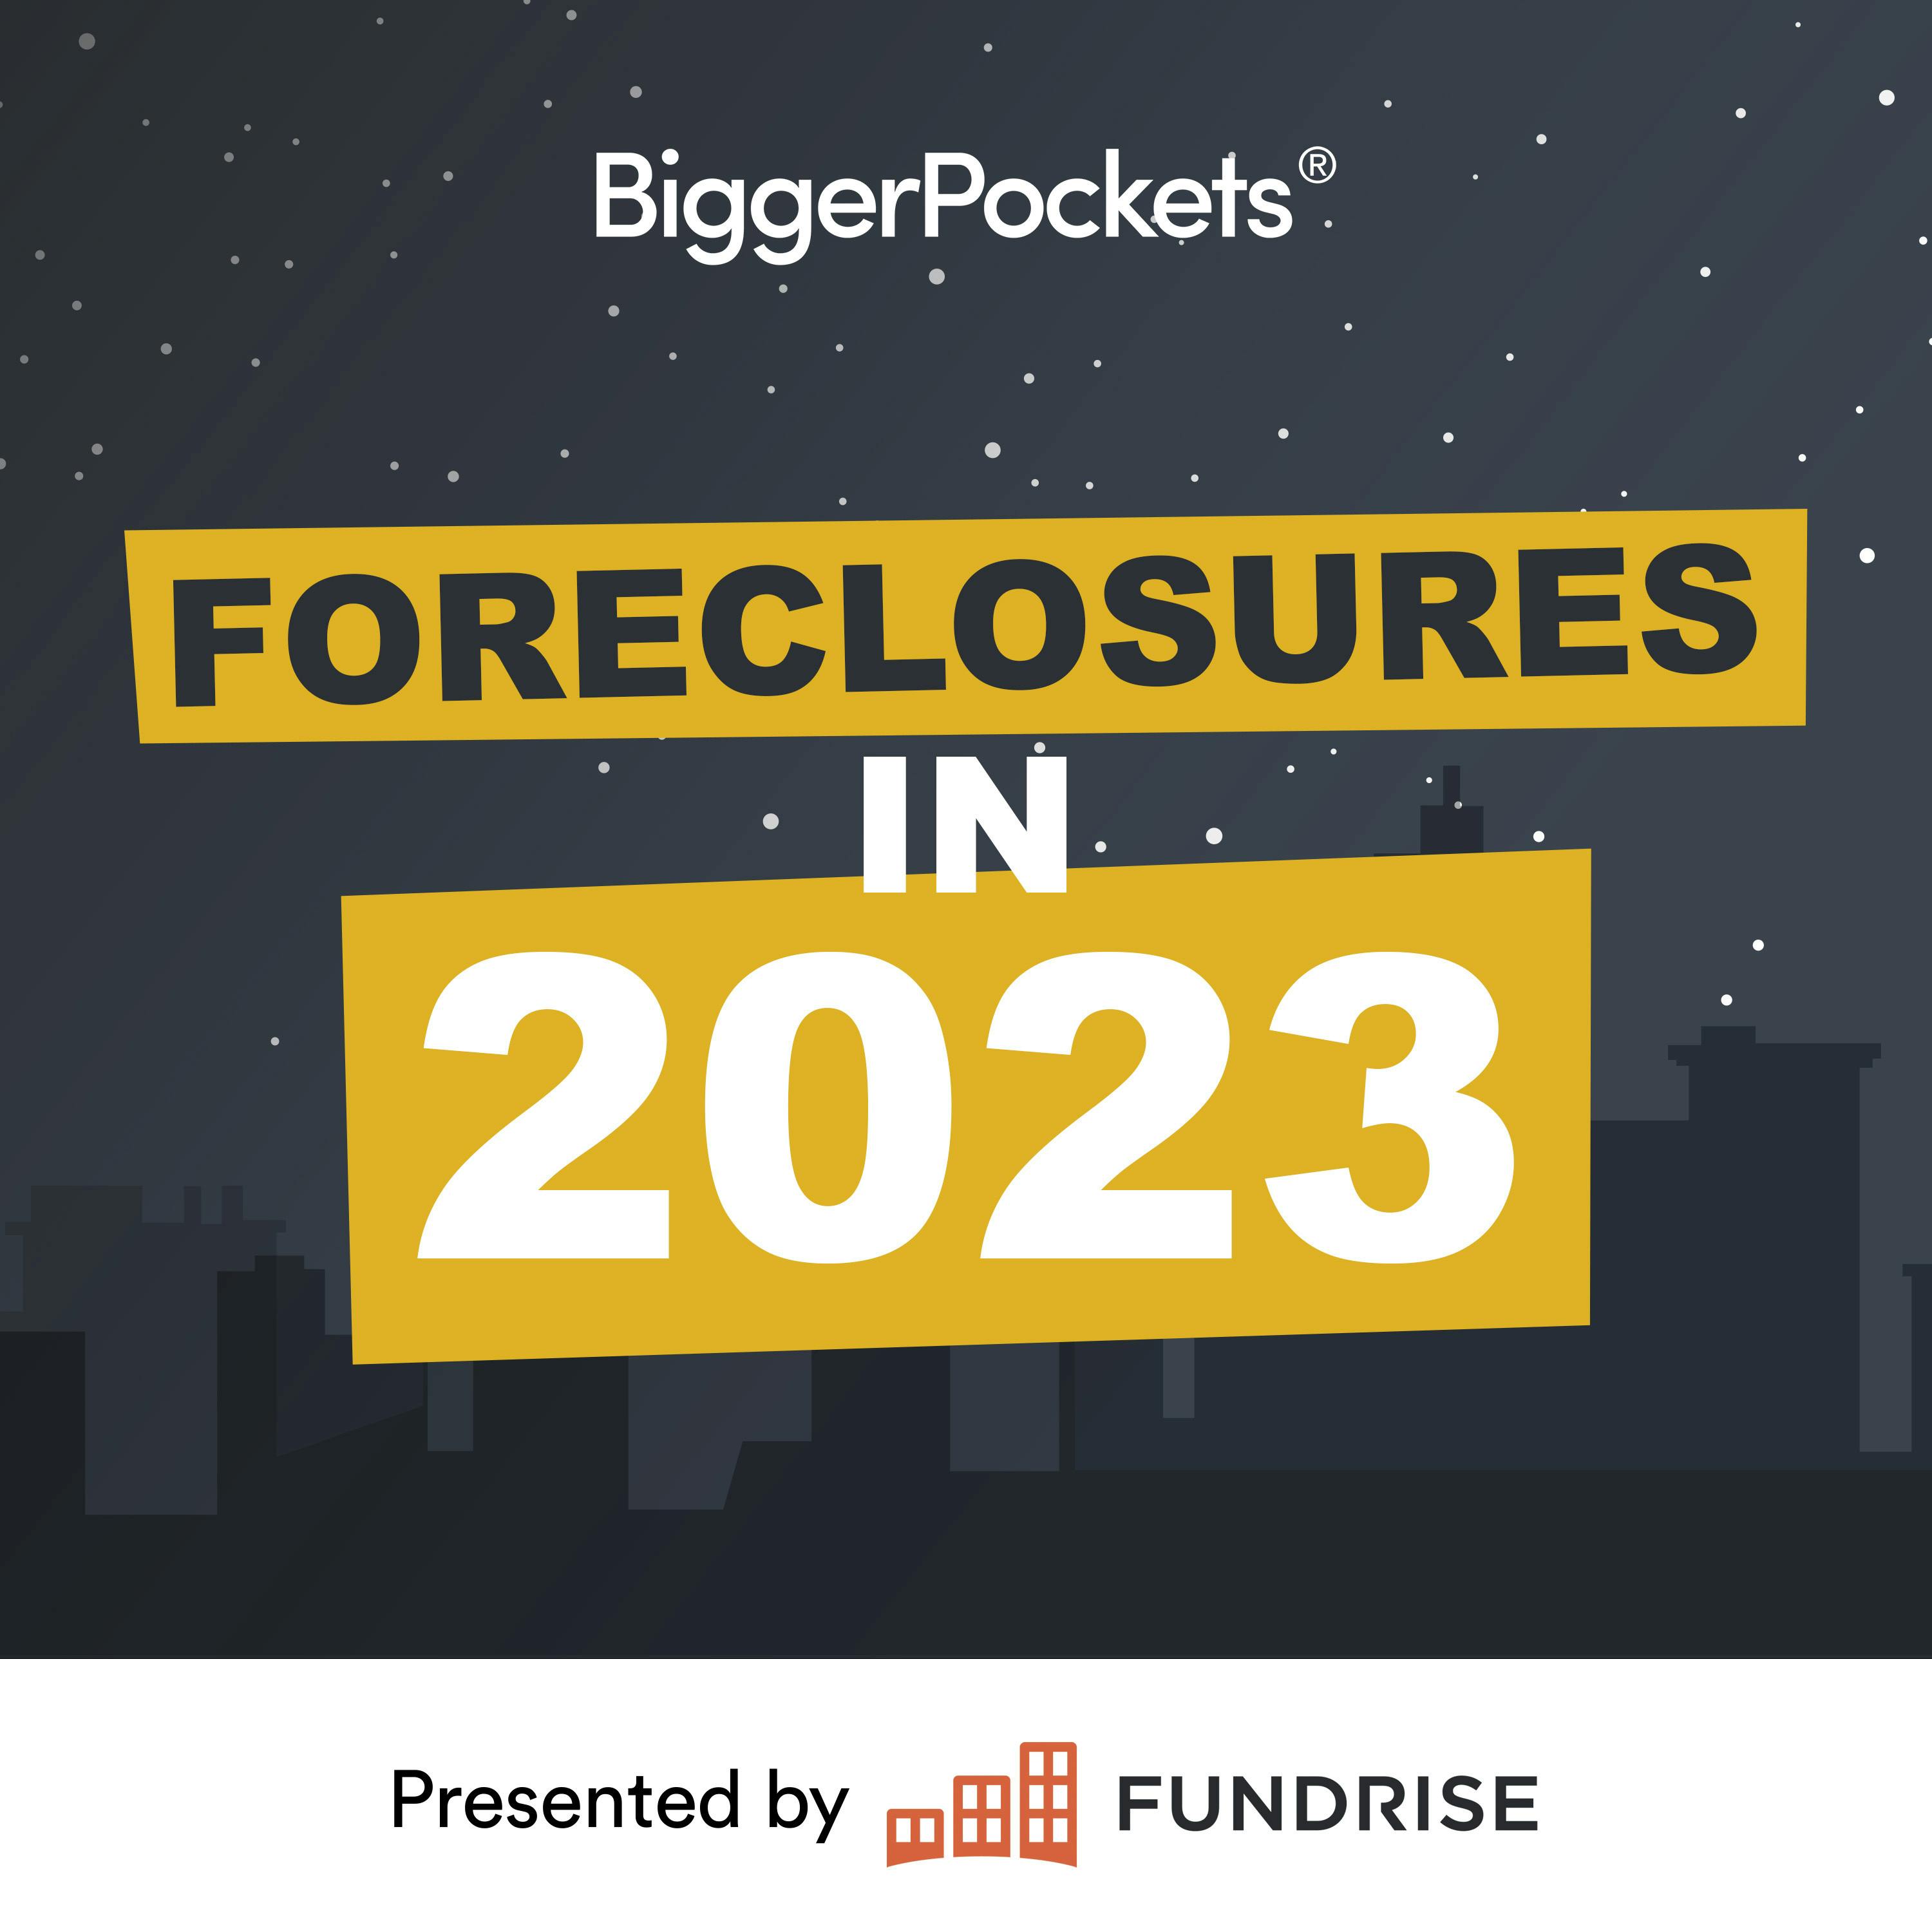 66: 2023 Foreclosure Forecast: A False Flag with Inflated Numbers?